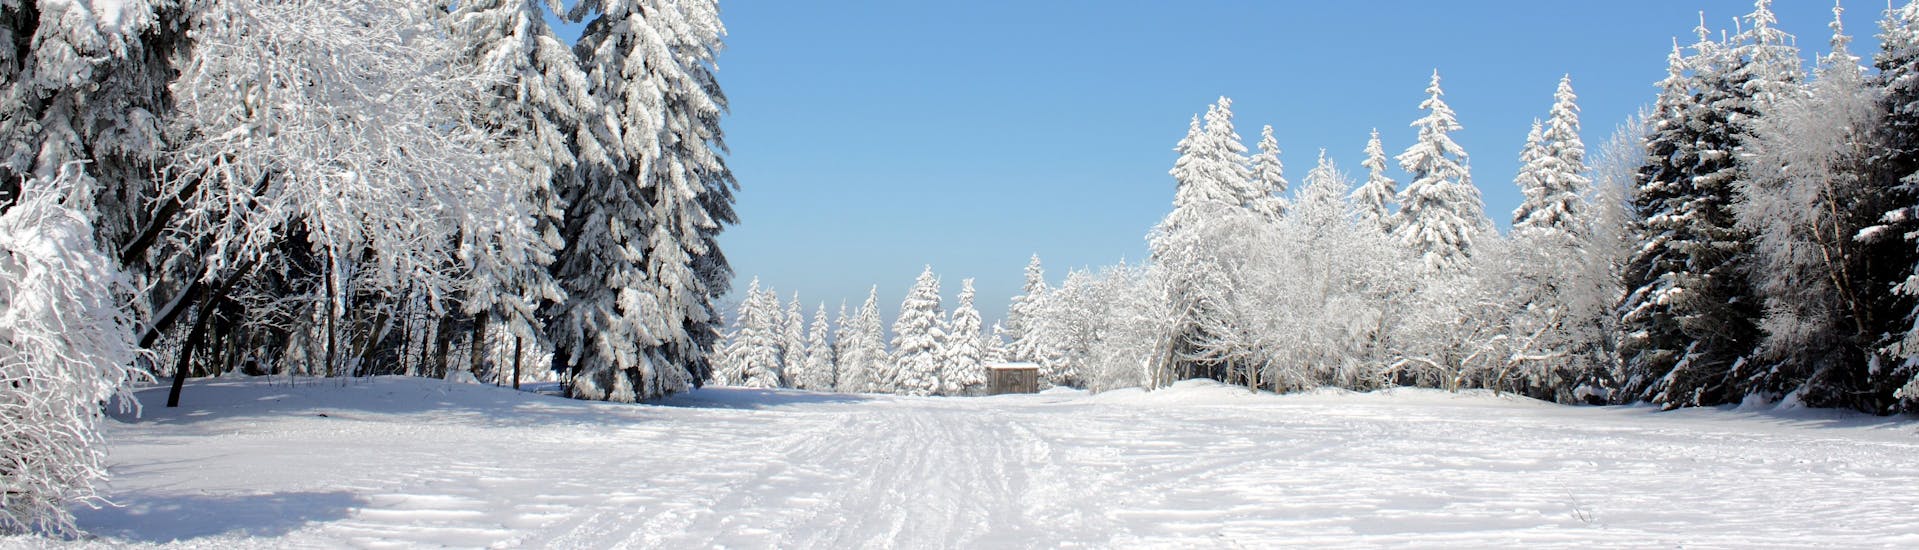 An image of the snowy winter landscape near Altenberg, a popular German ski resort where local ski schools organise ski lessons for kids and adults, no matter their level.